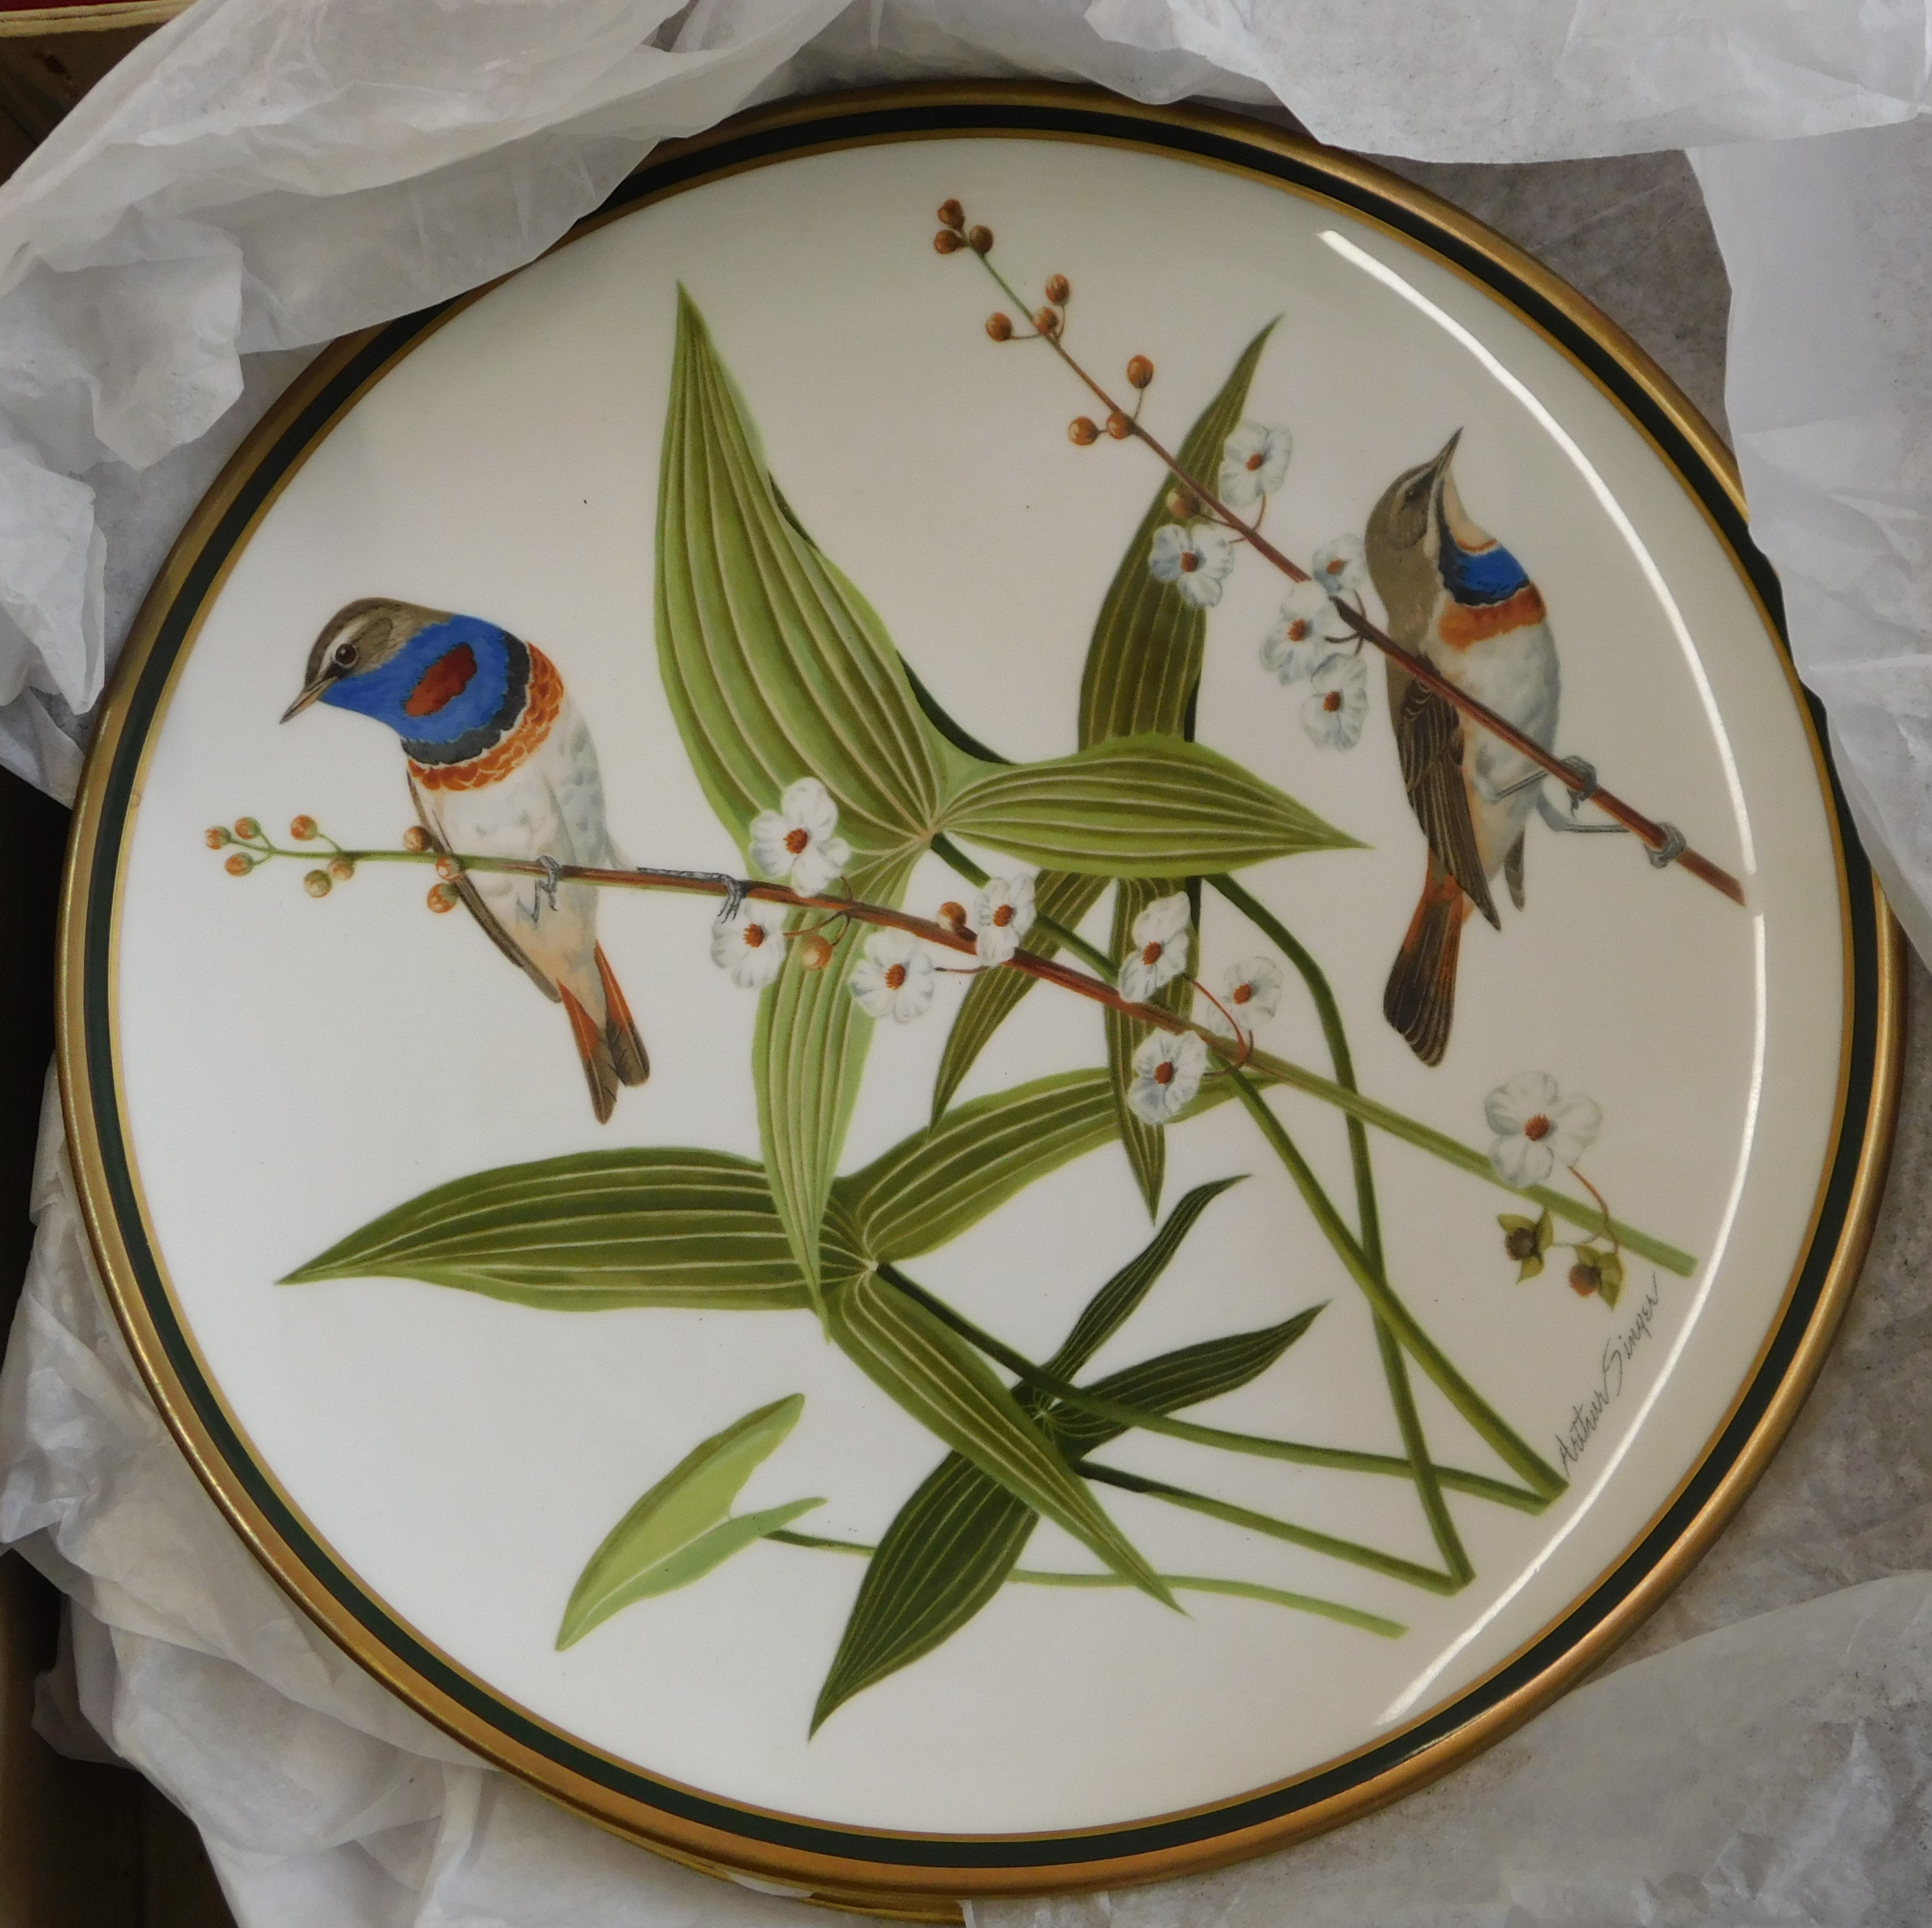 Plates (8) - 'Songbirds of the World' Franklin Porcelain crafted in England by Wedgewood 1977, - Image 4 of 5